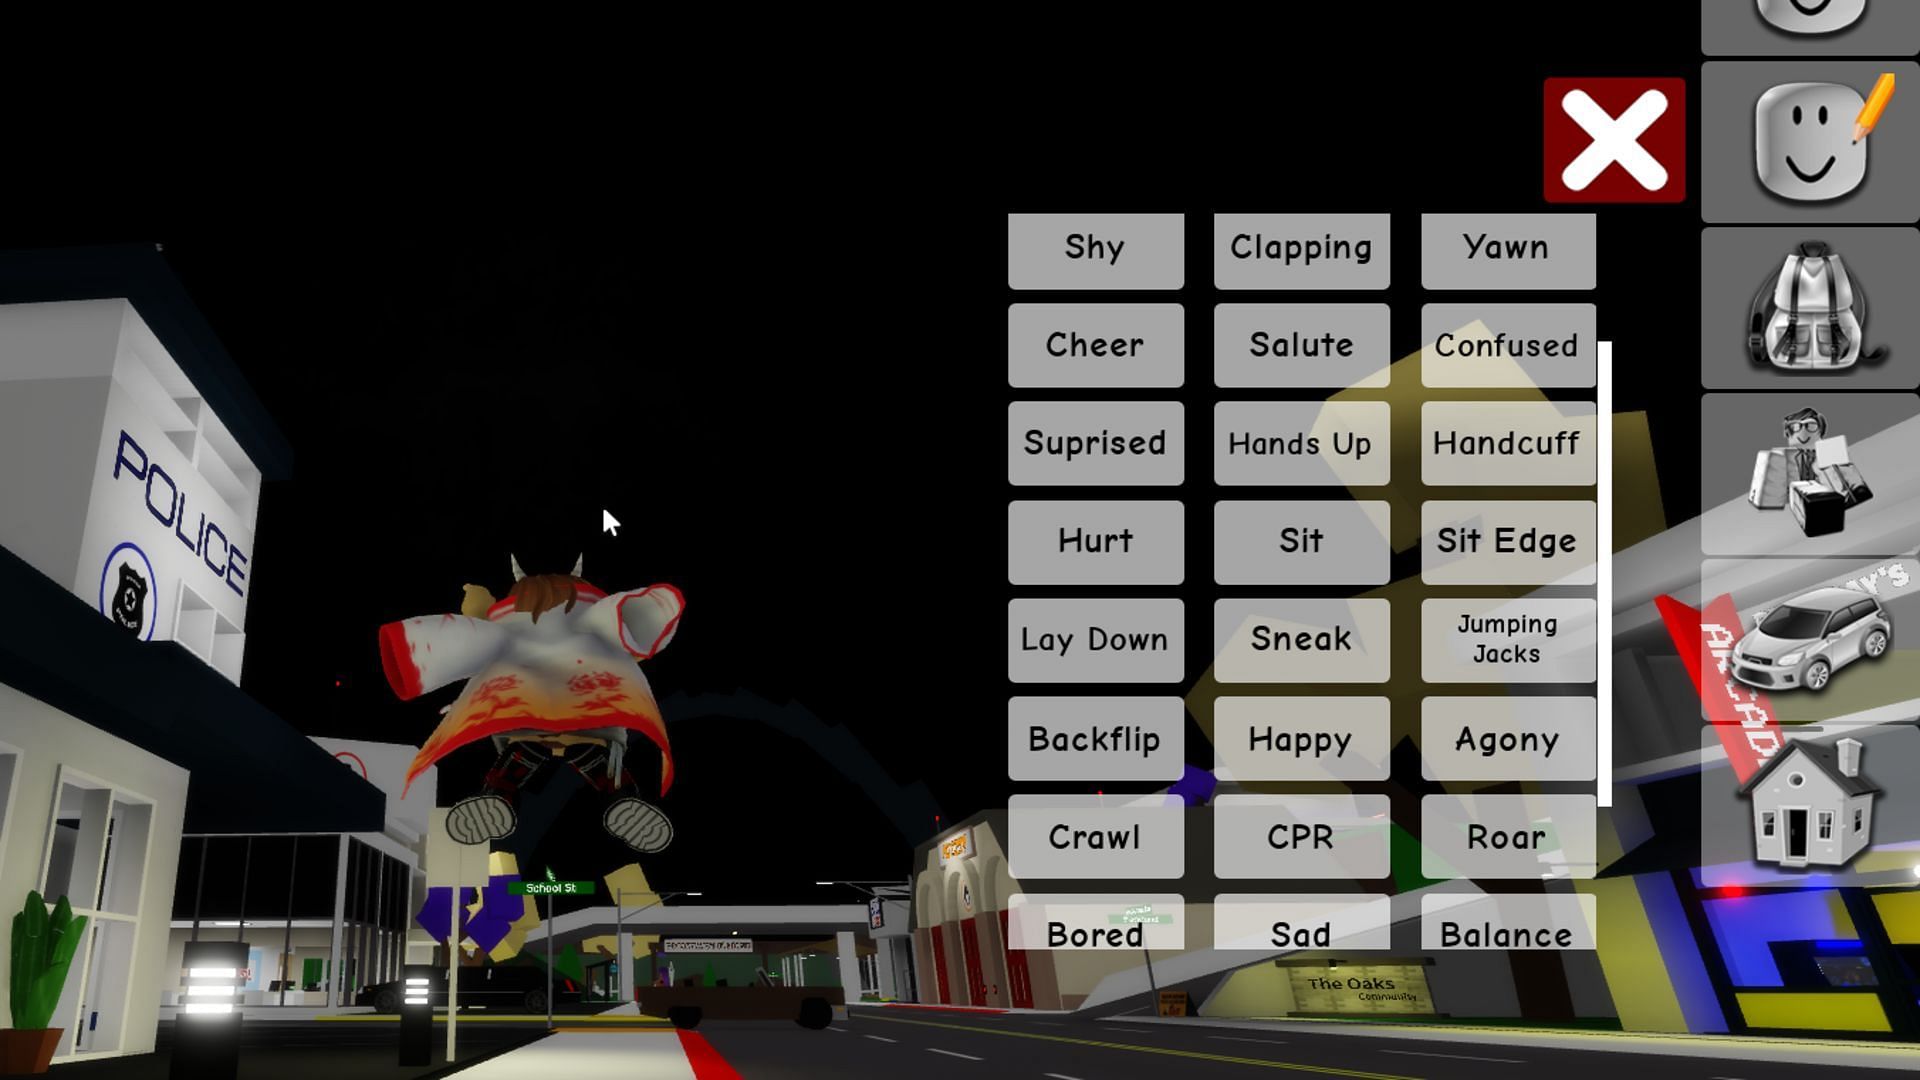 The flying exploit is hard to control. (Image via Roblox)